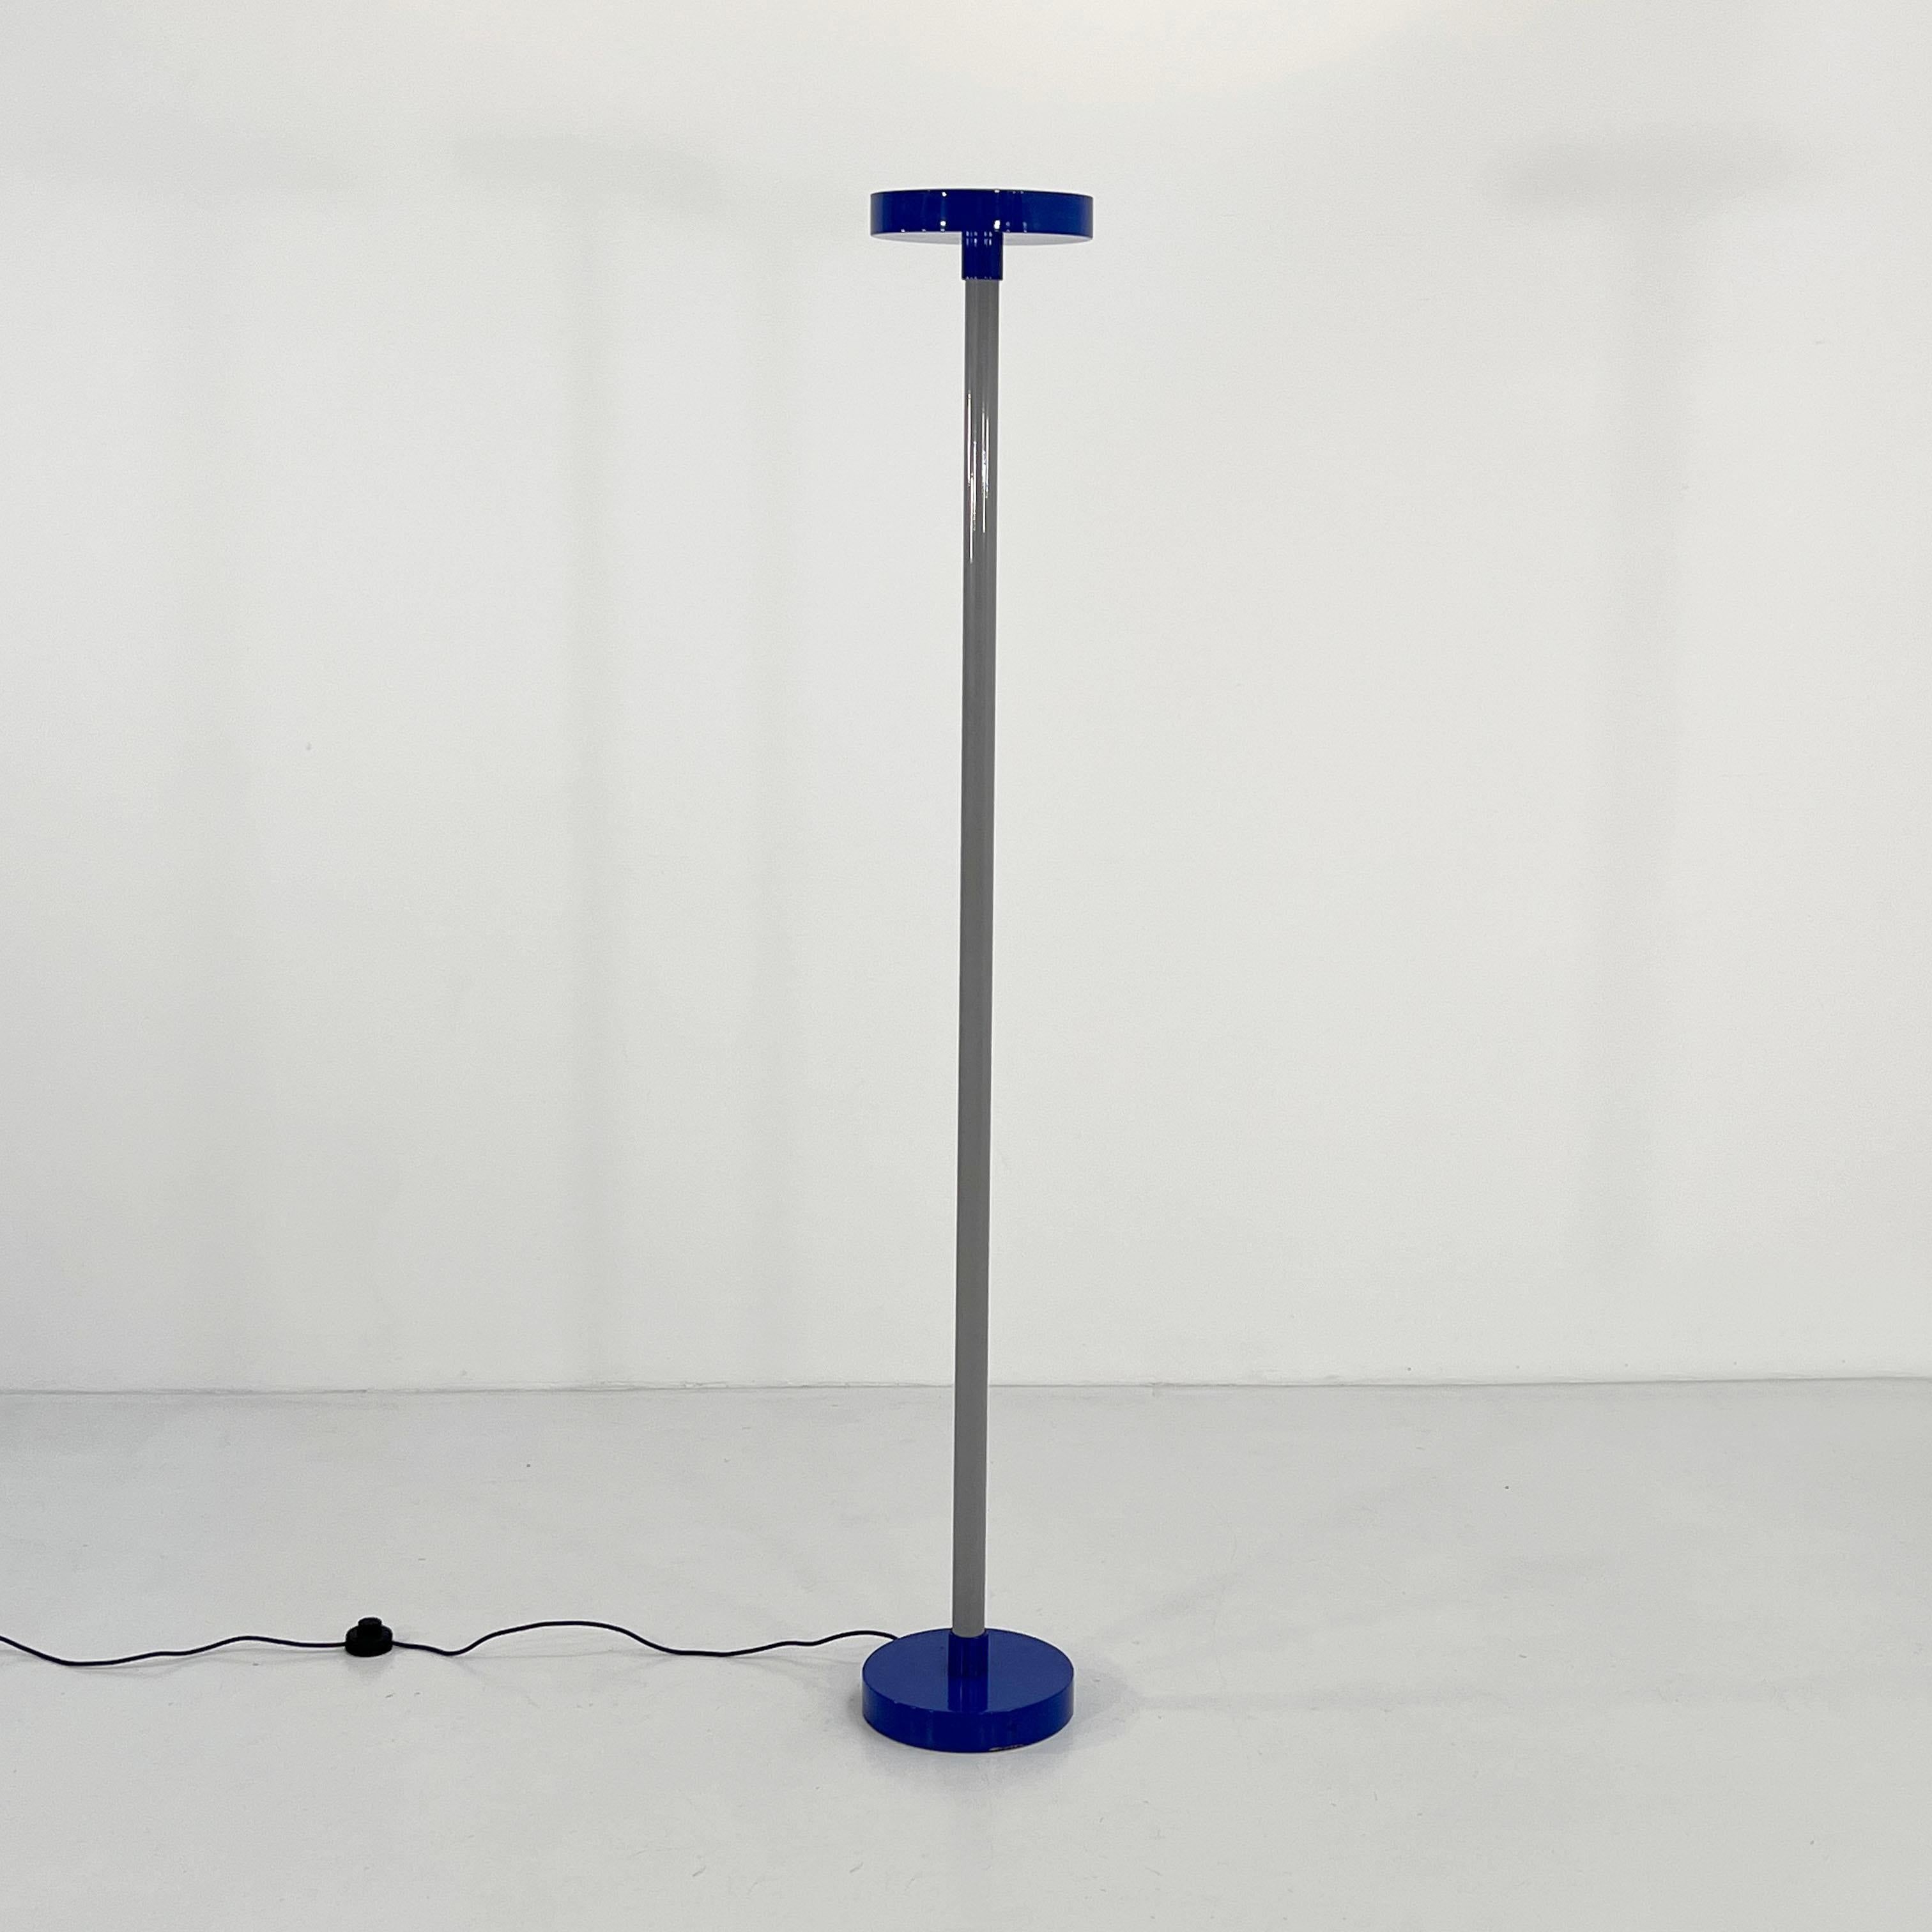 Beam Floor Lamp by Ettore Sottsass for Bieffeplast, 1980s
Designer - Ettore Sottsass
Producer - Bieffeplast
Model - Beam Floor Lamp 
Design Period - Eighties
Measurements - Width 30 cm x Depth 30 cm x Height 190 cm
Materials - Metal
Color - Blue,